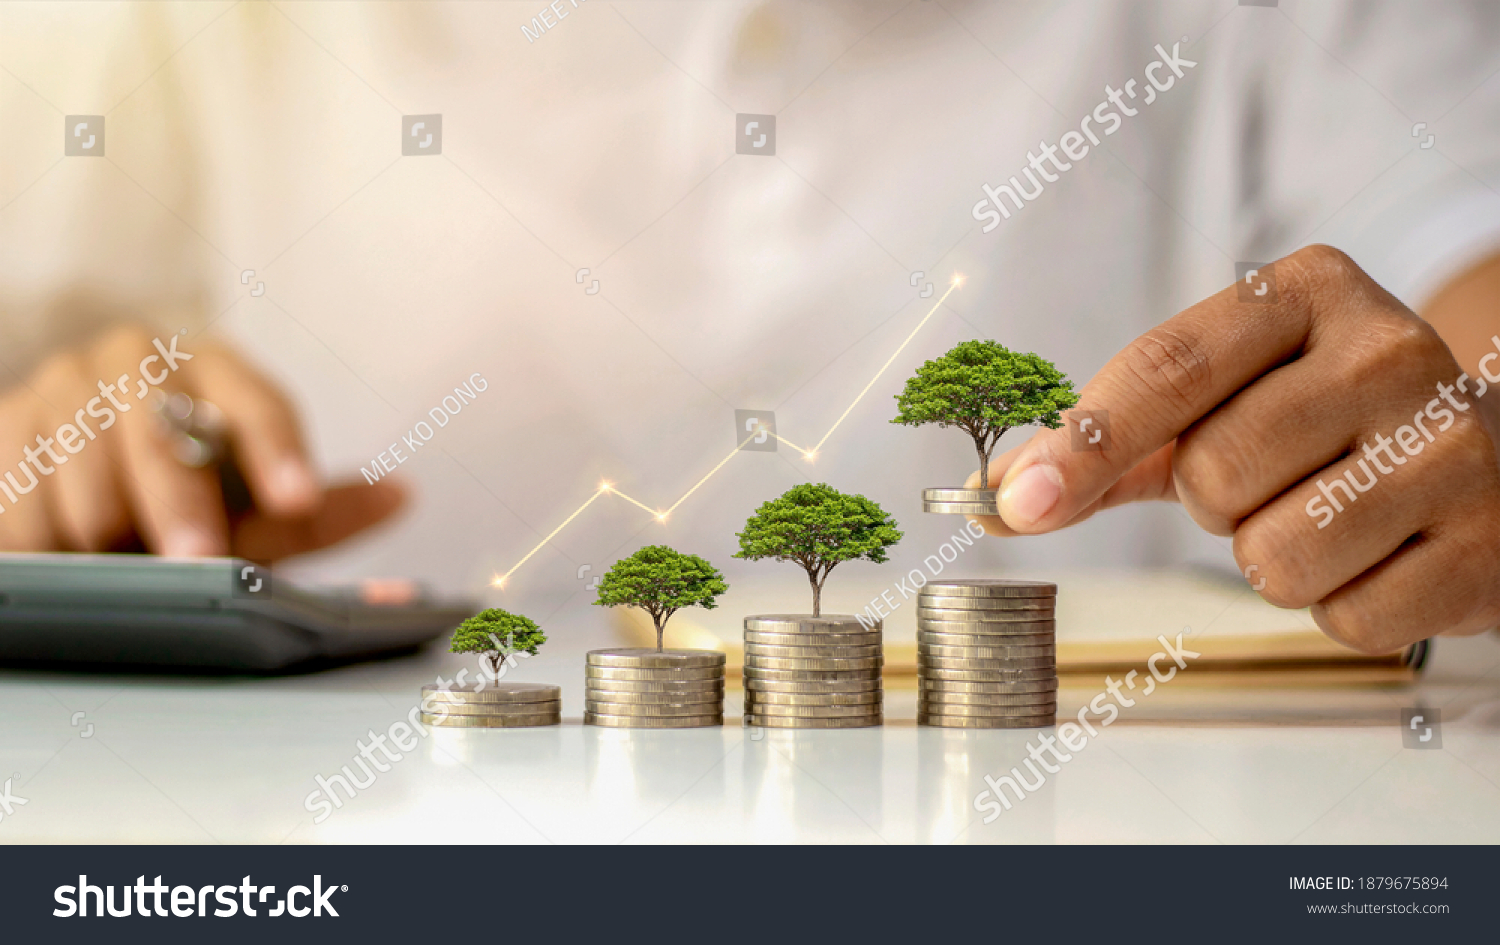 A businessman holding a coin with a tree that grows and a tree that grows on a pile of money. The idea of maximizing the profit from the business investment. #1879675894